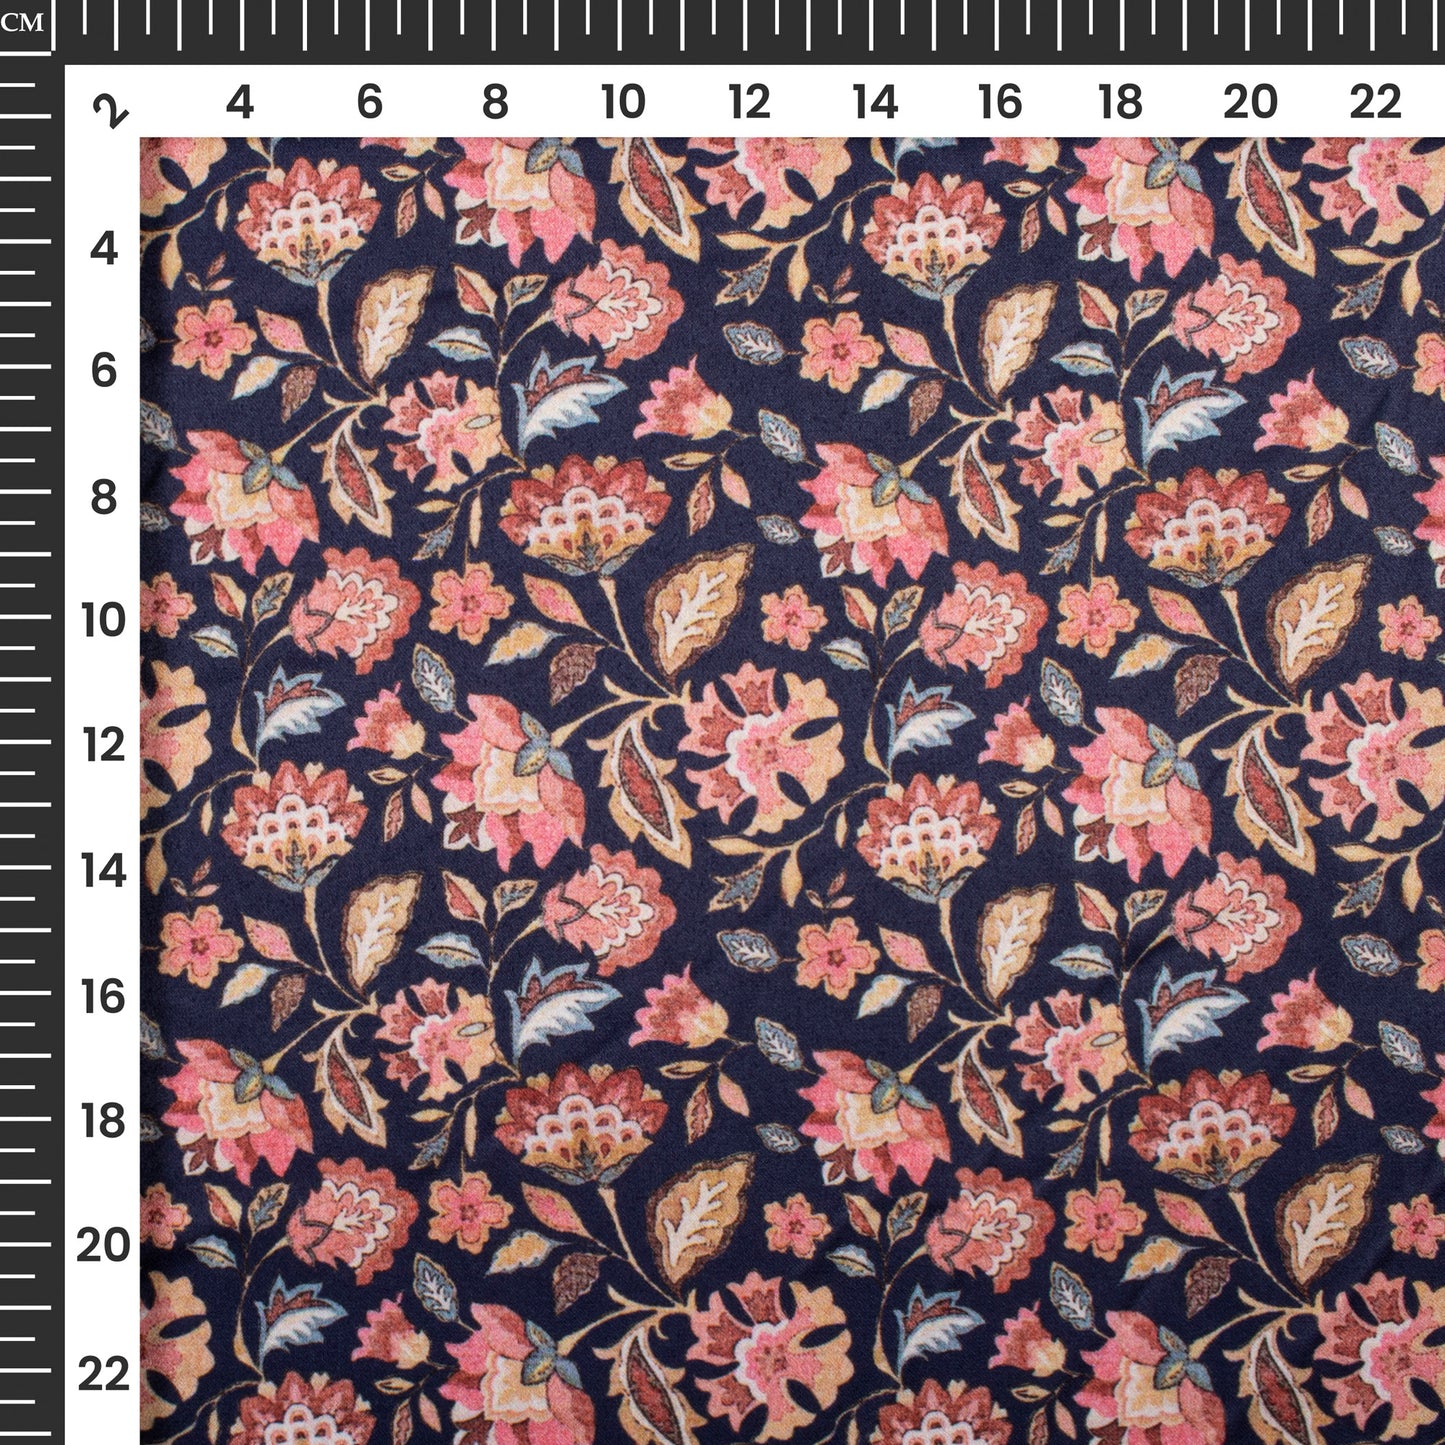 Navy Blue And Pink Floral Digital Print Charmeuse Satin Fabric (Width 58 Inches)